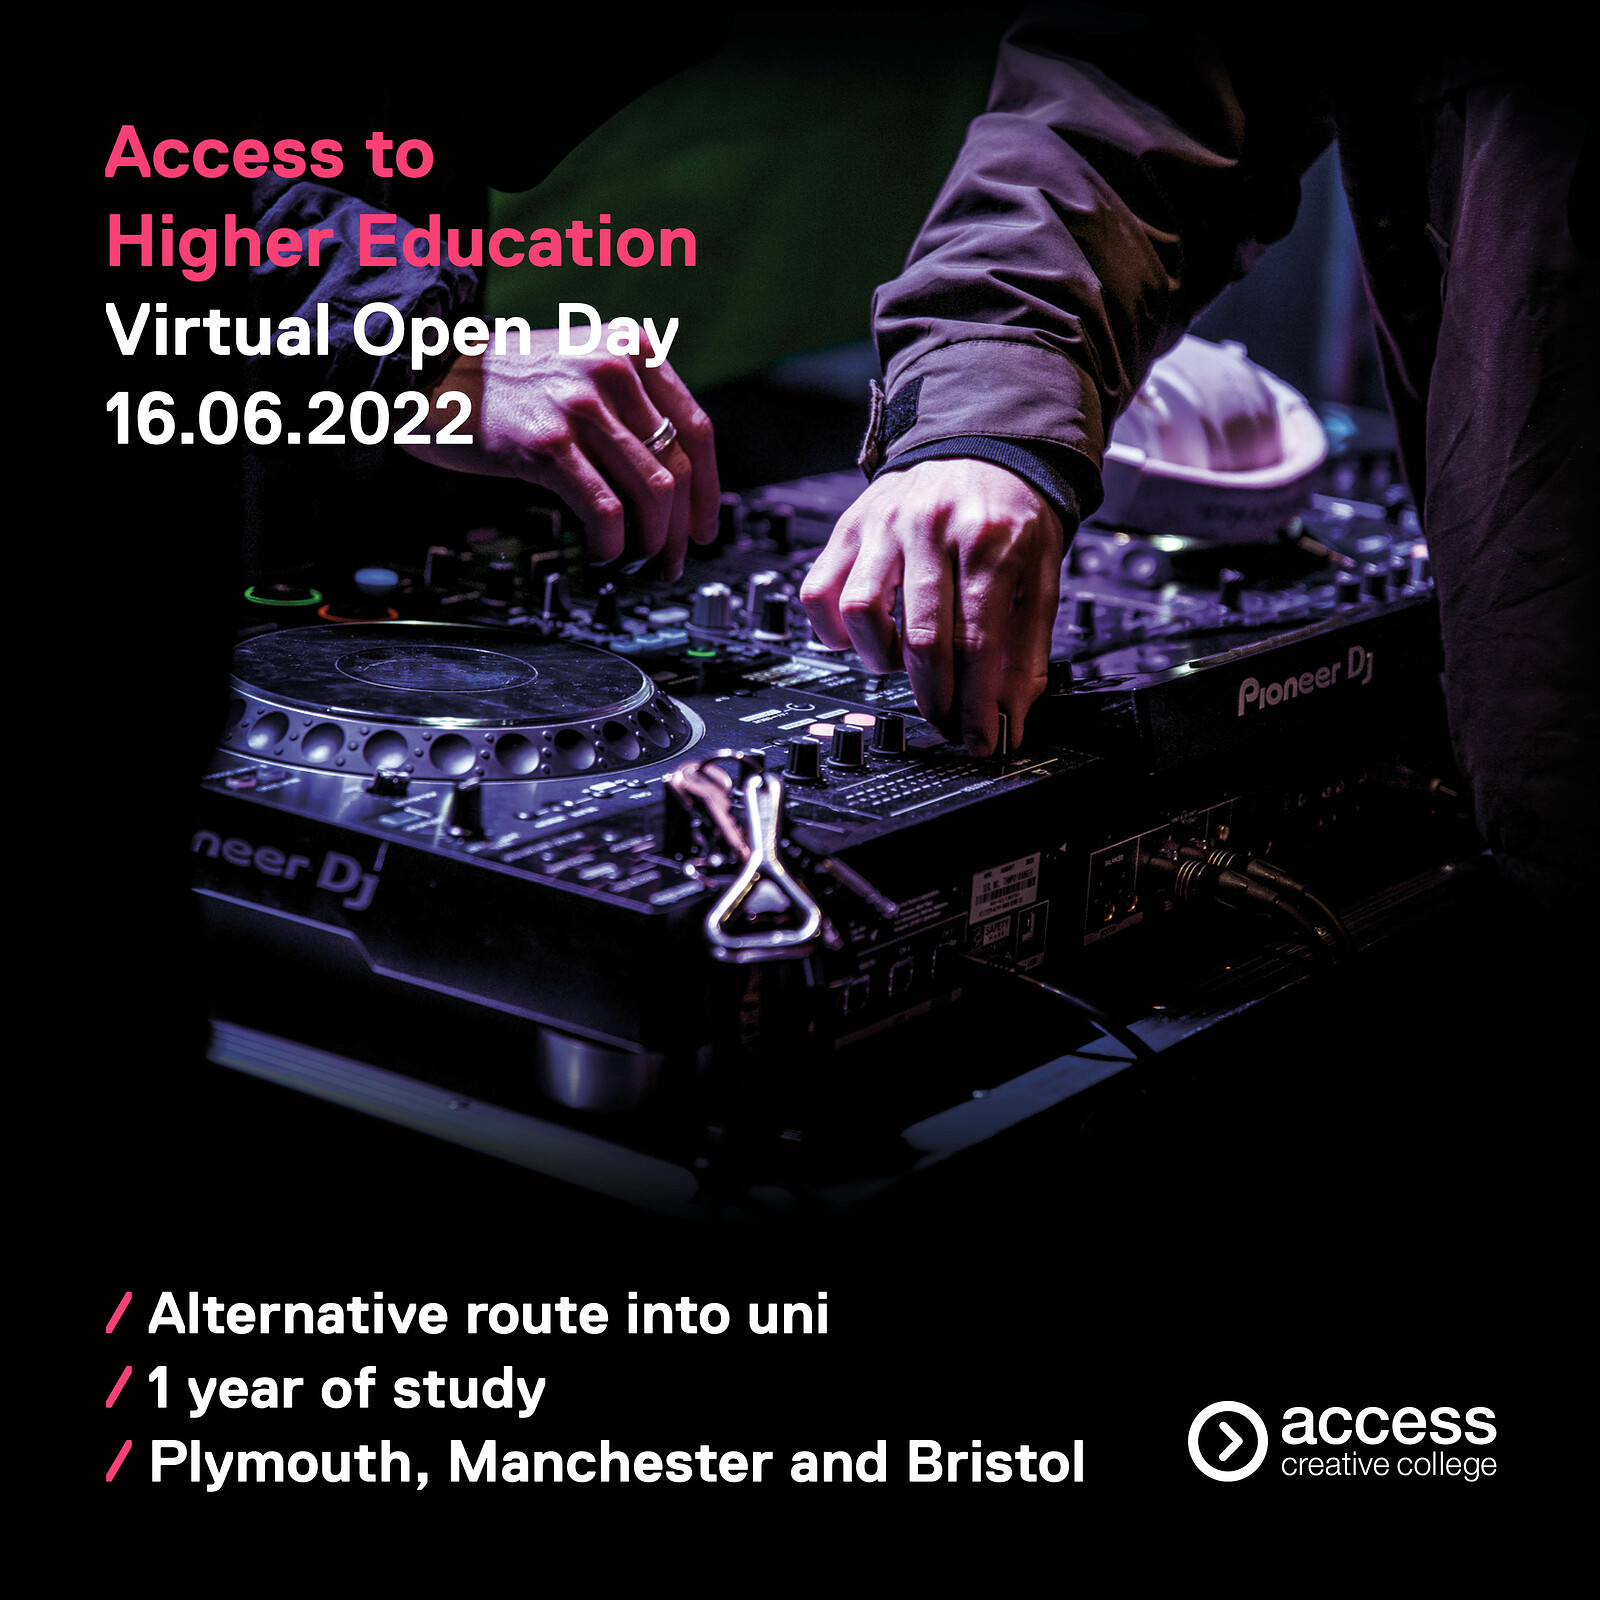 Access Creative College 19+ Virtual Open Day at Access Creative College